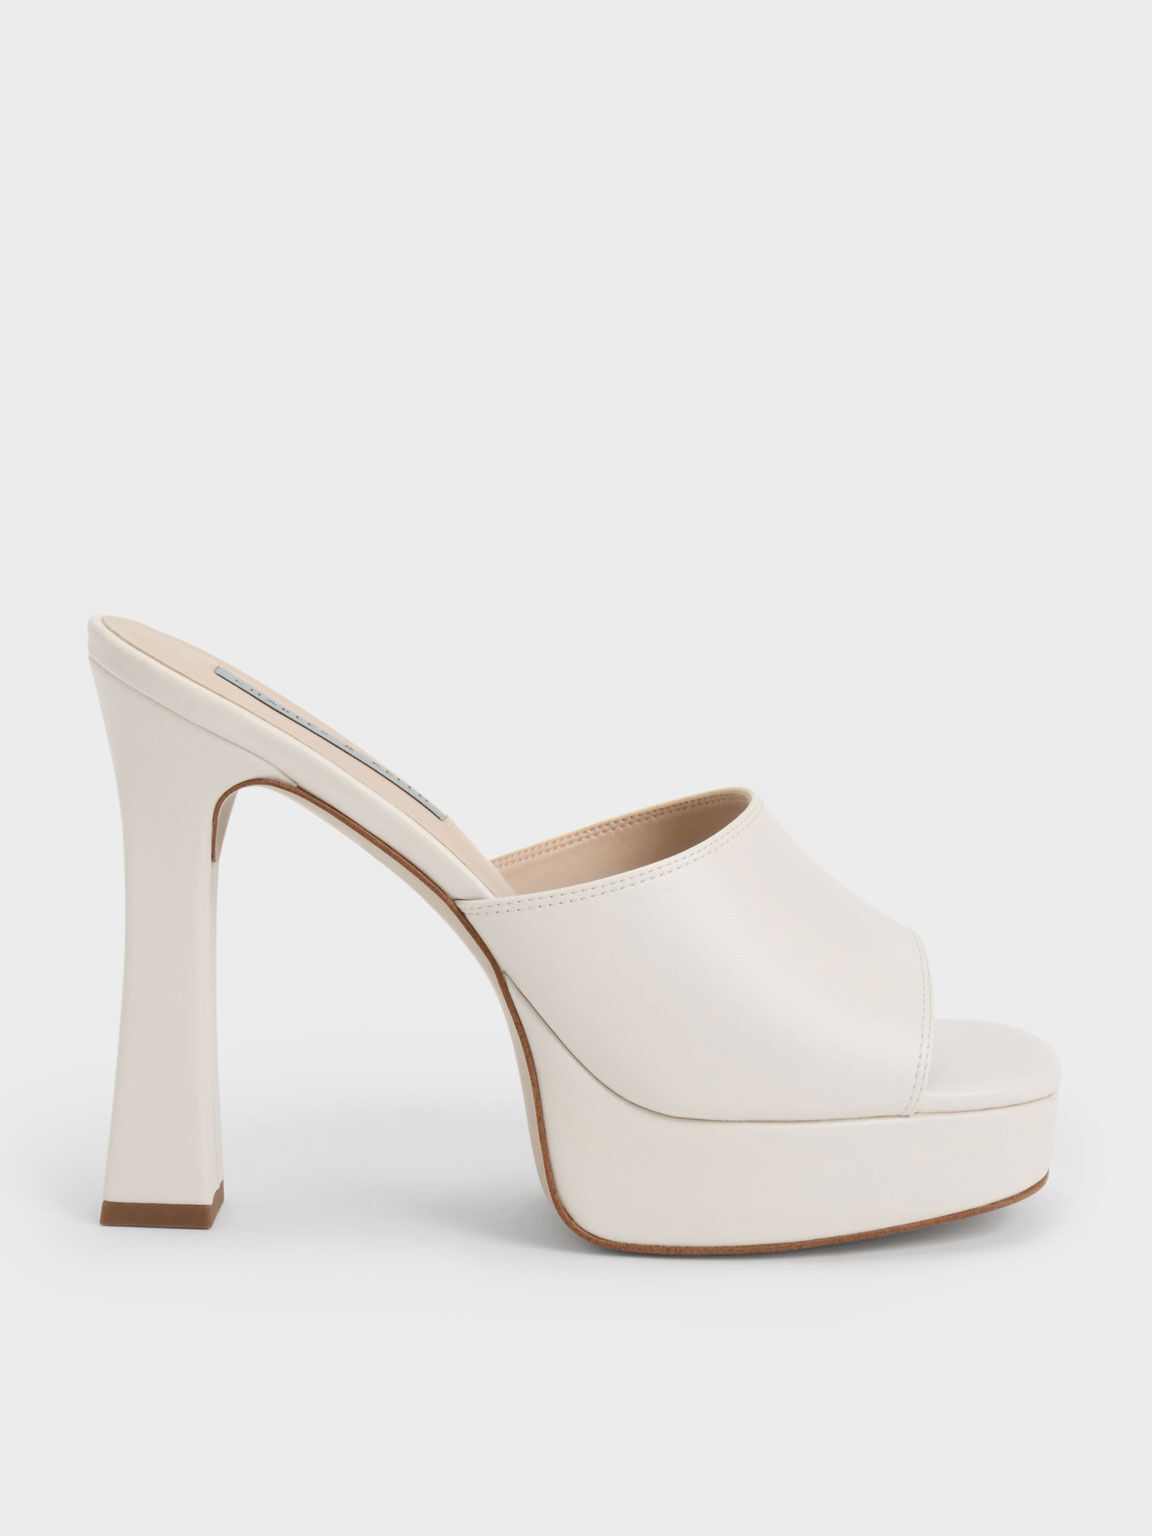 Cooper Flared Block Heels - Wide Fit in White | Number One Shoes